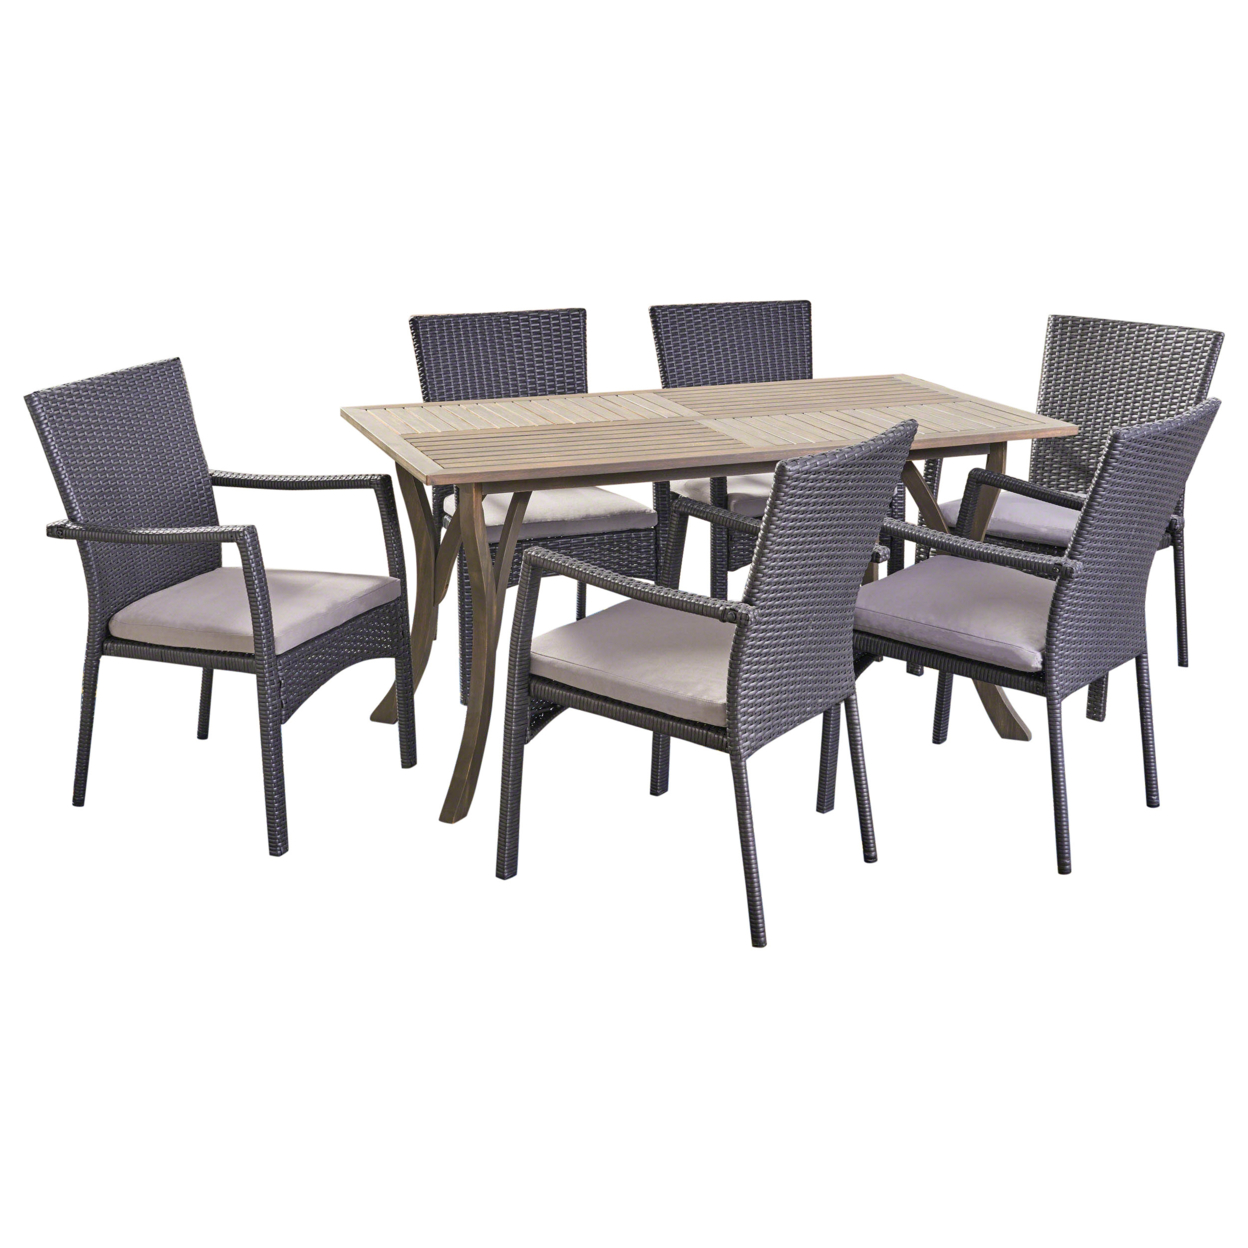 Ronnie Outdoor 7 Piece Wood And Wicker Dining Set, Gray And Gray